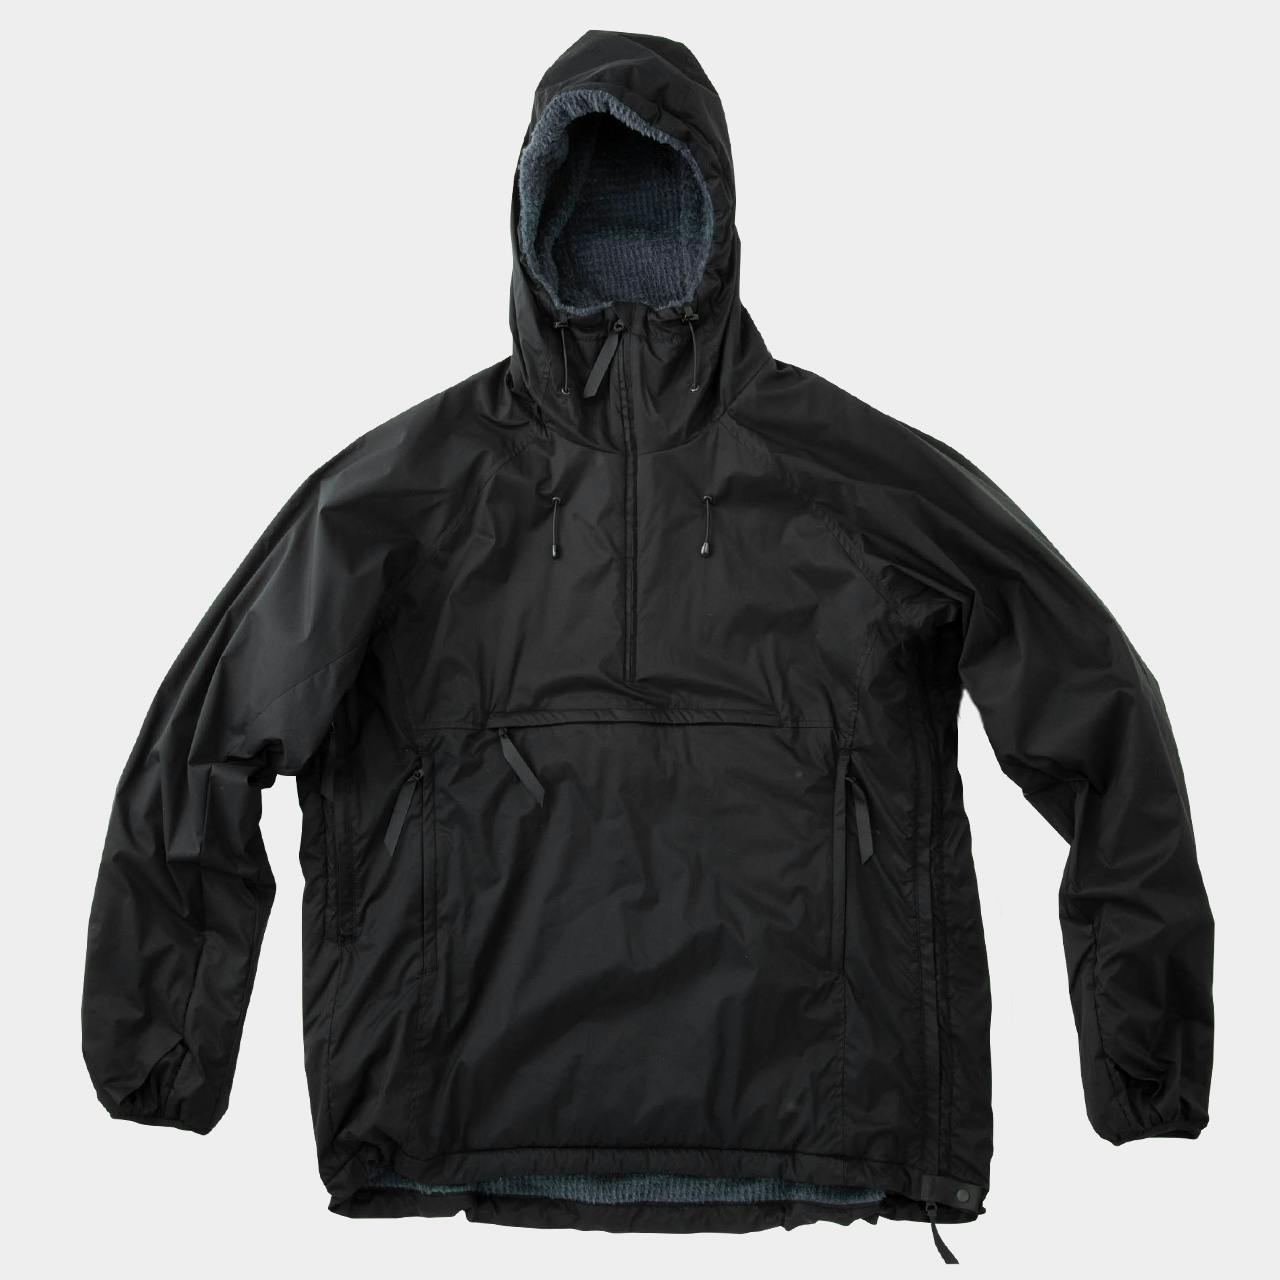 Alpha Anorak<br>Active Insulation for Winter<br>New Color Added<br>For Sale Oct 26, 18:00 JST